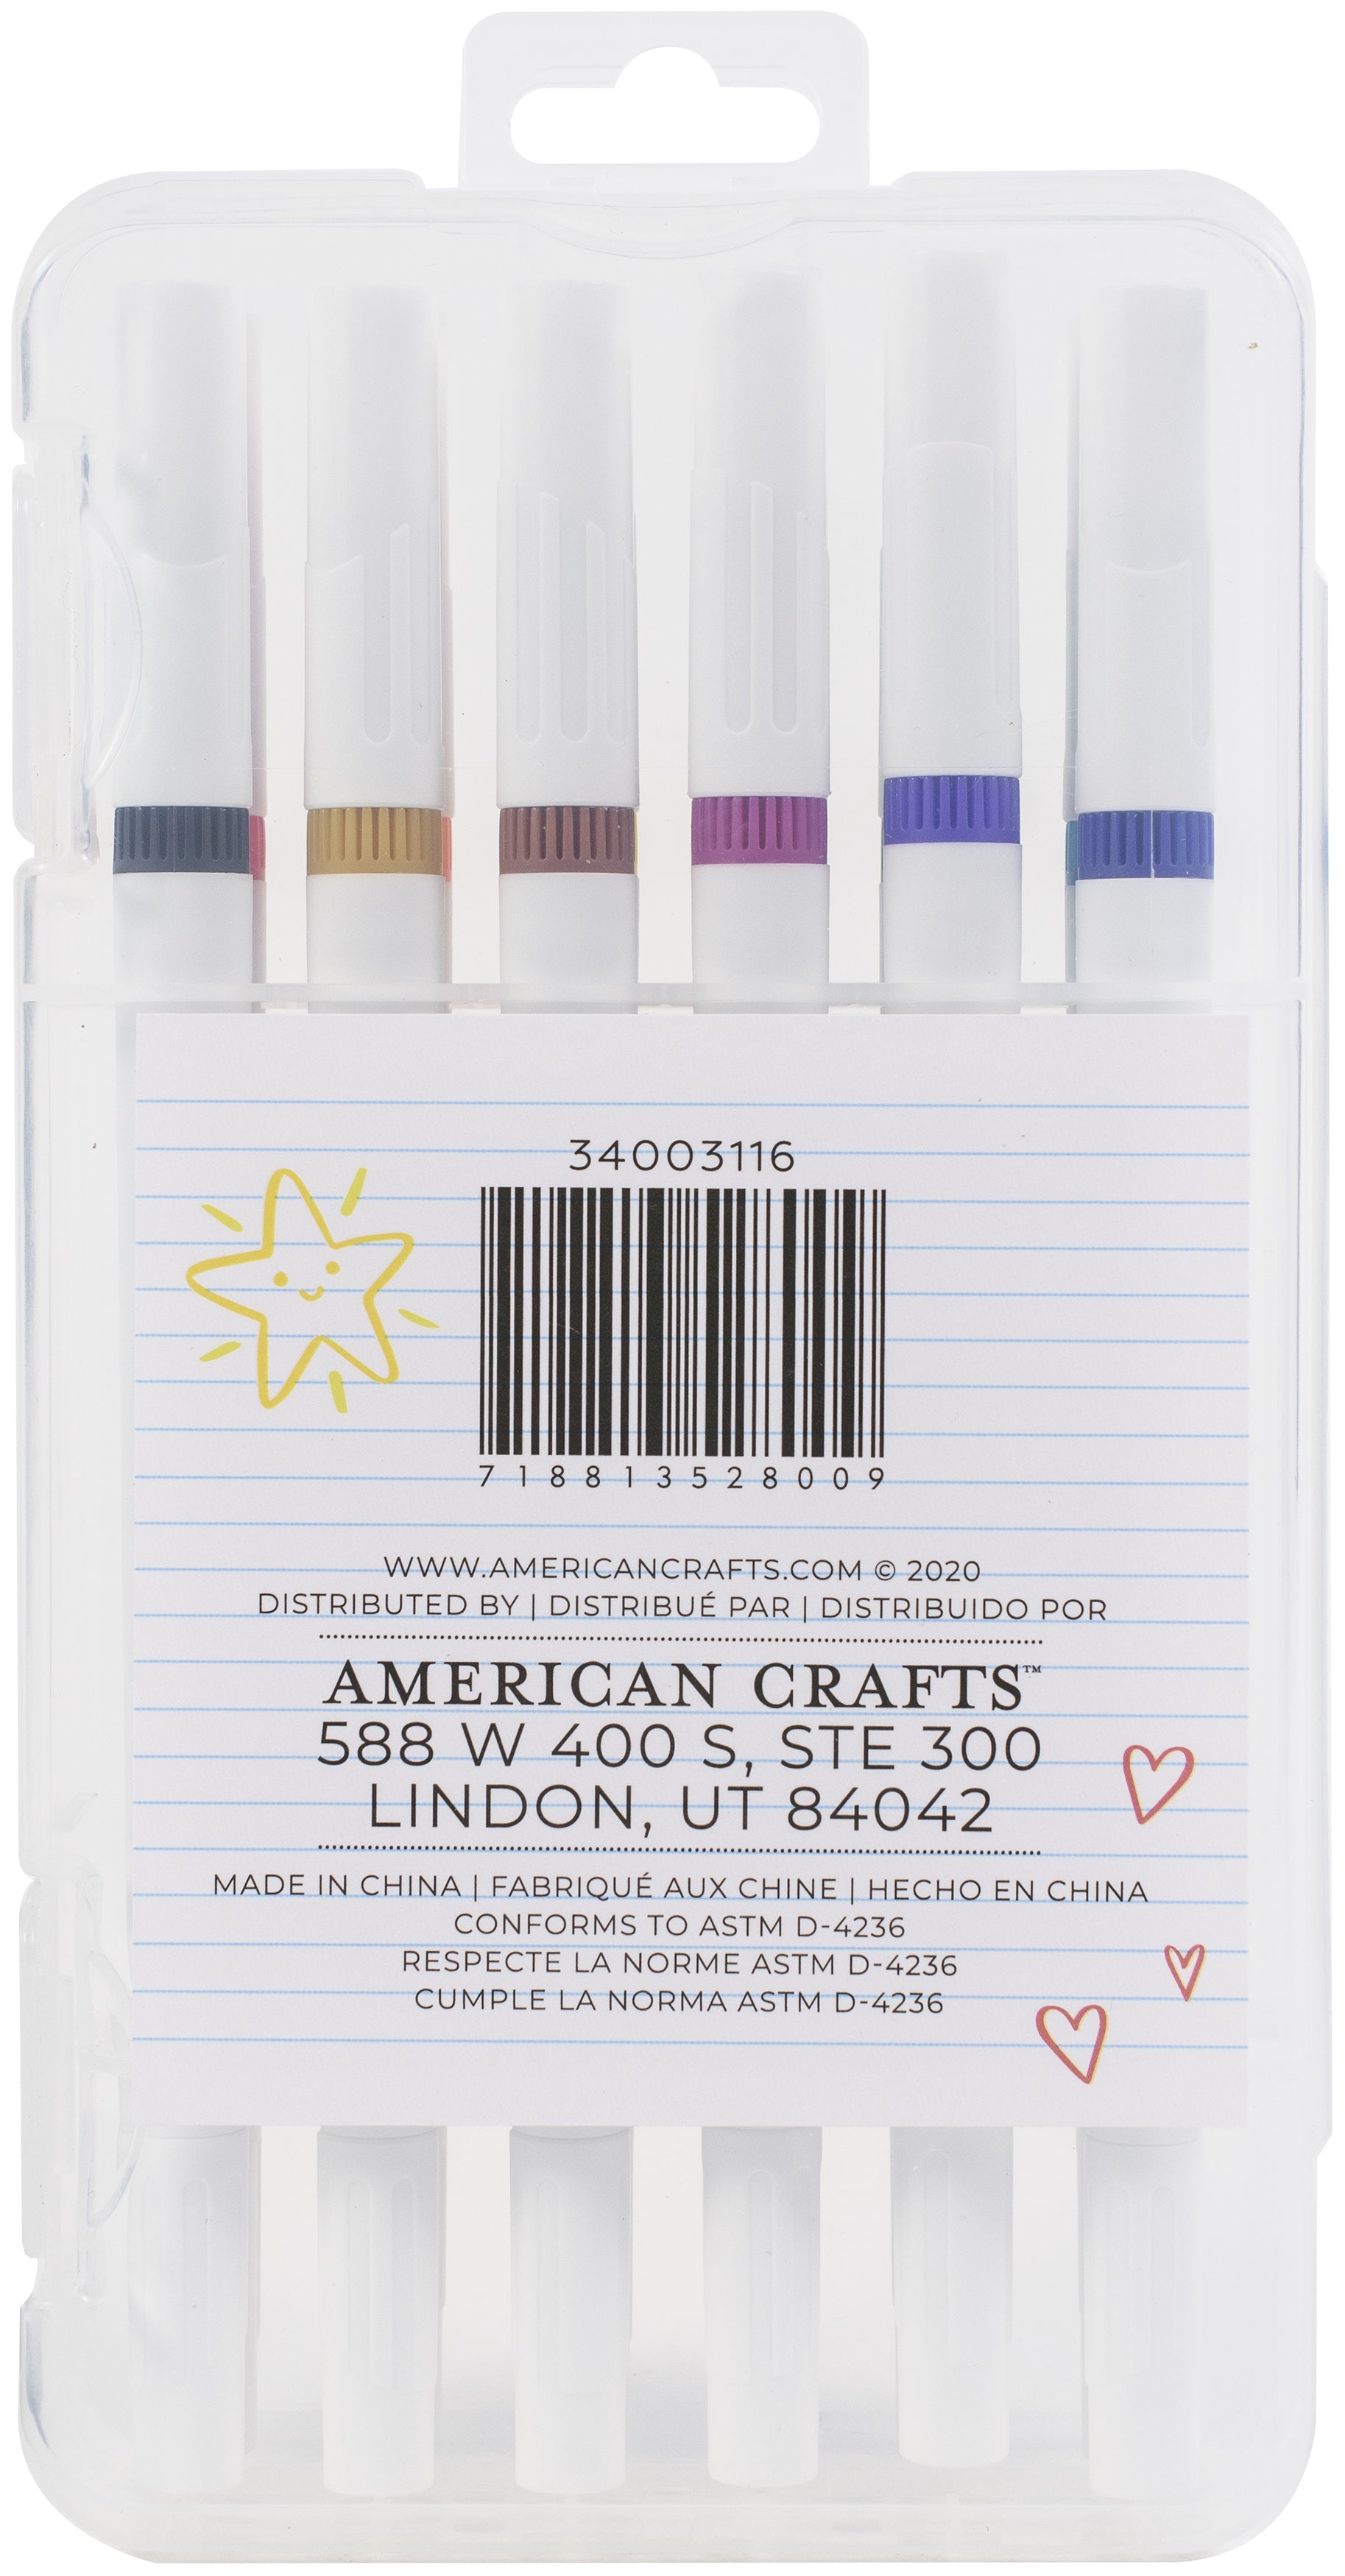 American Crafts Dual Color Markers